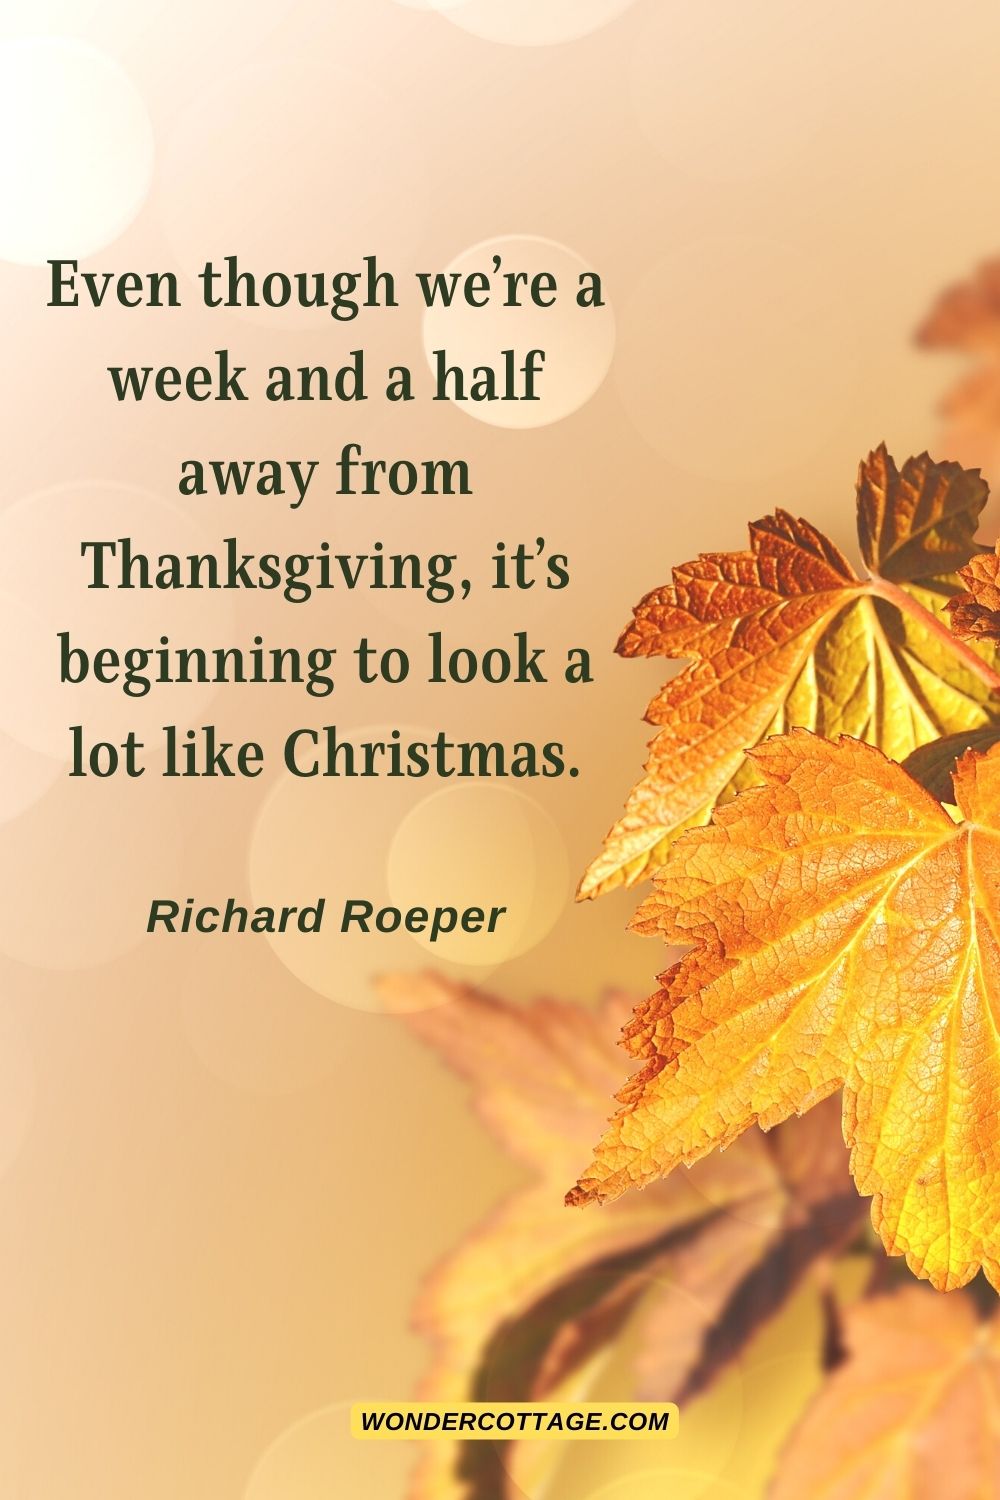 Even though we’re a week and a half away from Thanksgiving, it’s beginning to look a lot like Christmas. Richard Roeper